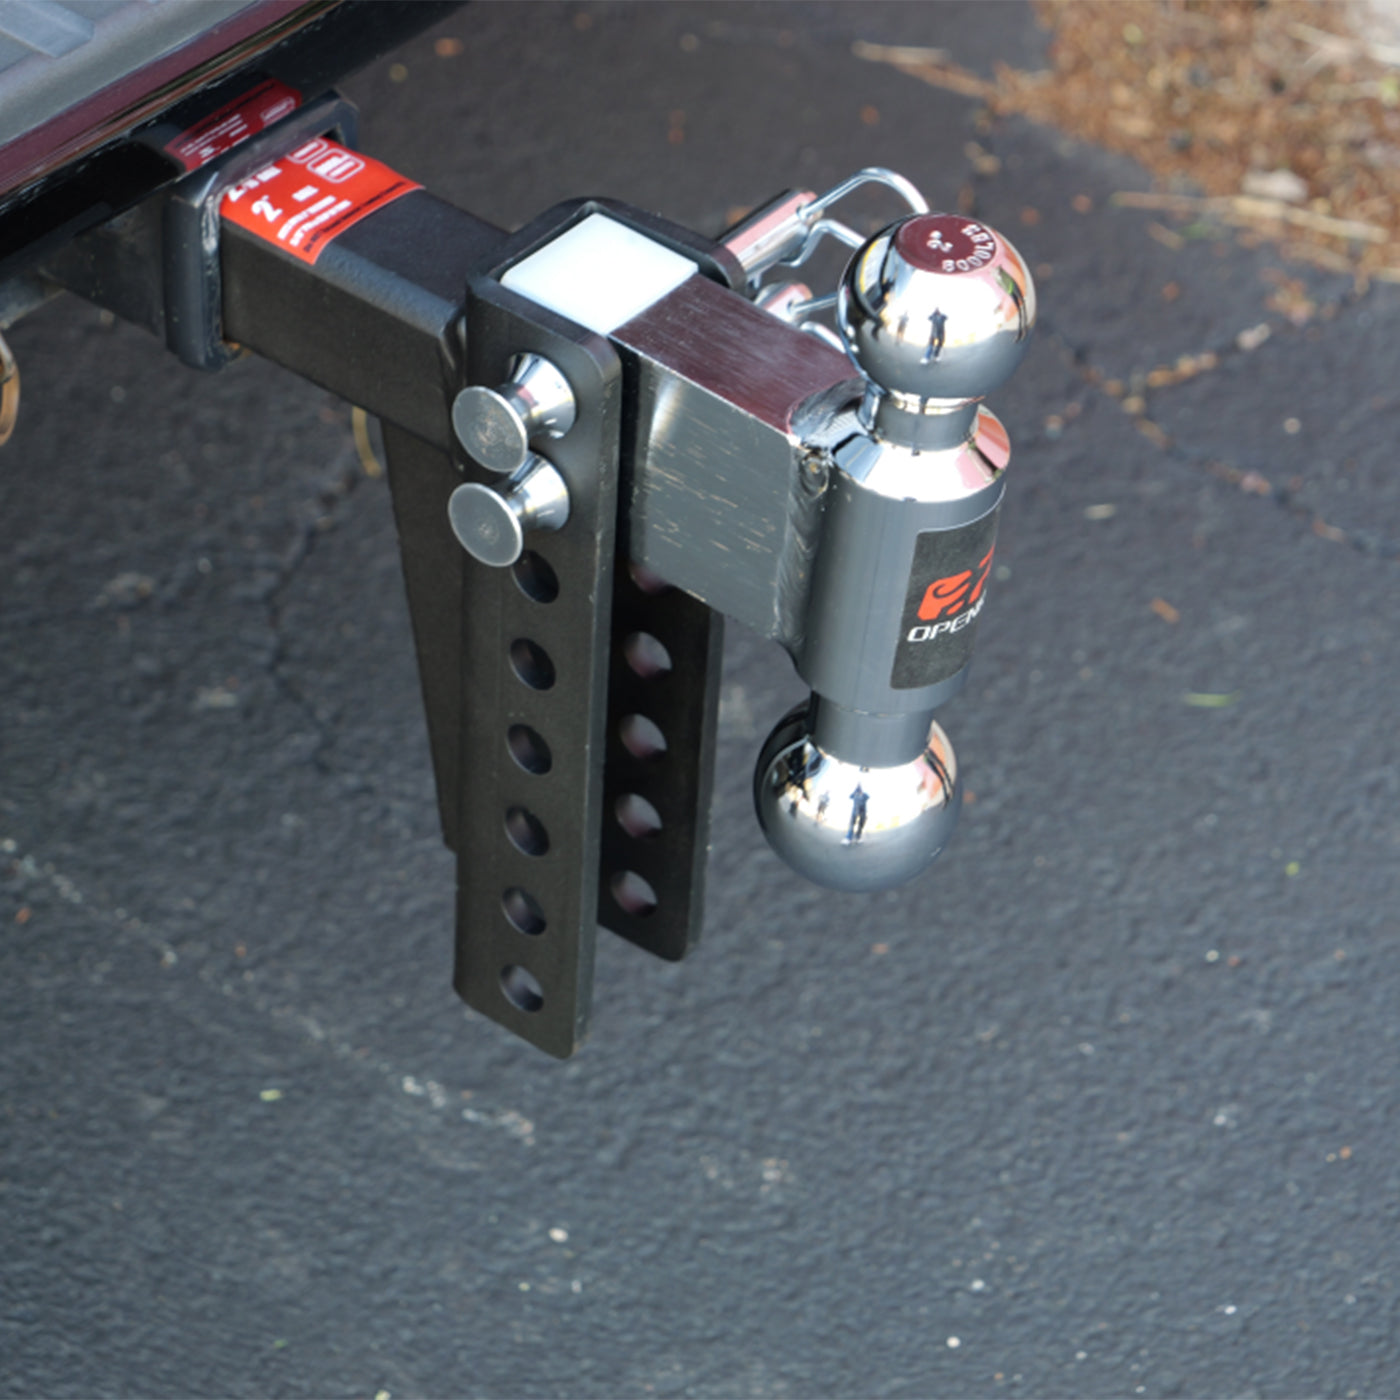 OPENROAD  10'' Adjustable Trailer Hitch for 2" Receiver  openroad4wd.com   